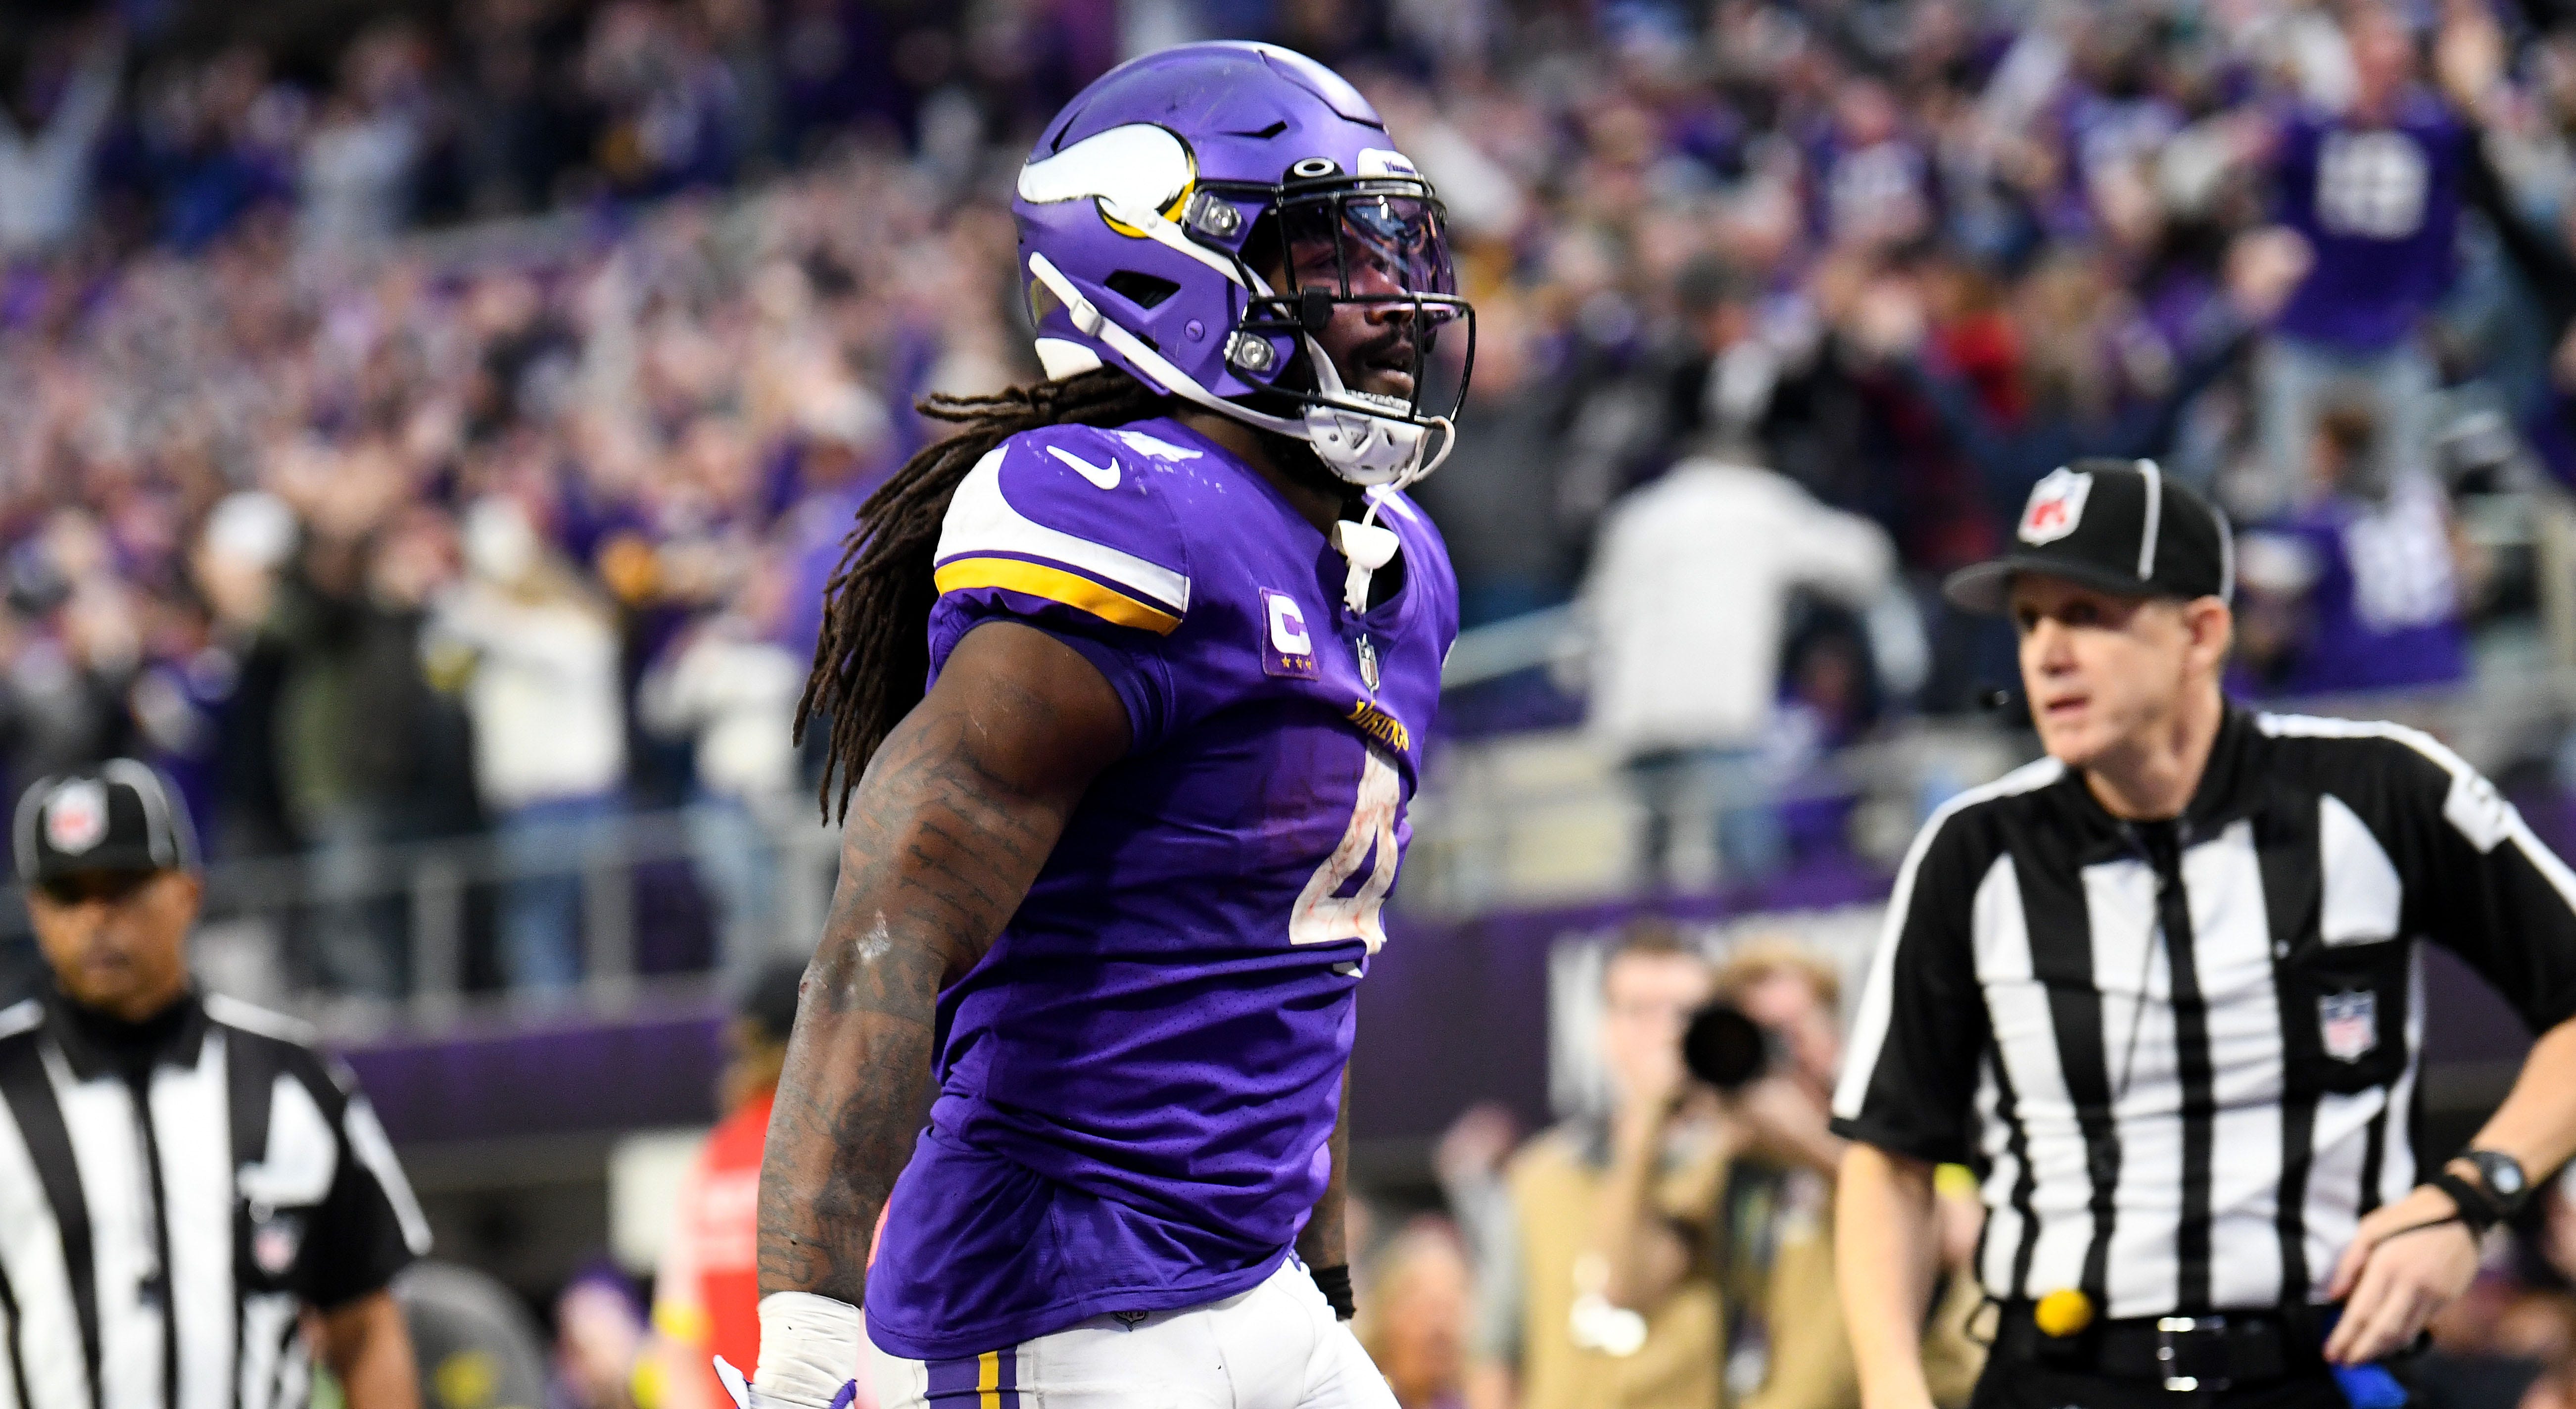 Vikings clinch NFC North after greatest comeback in NFL history